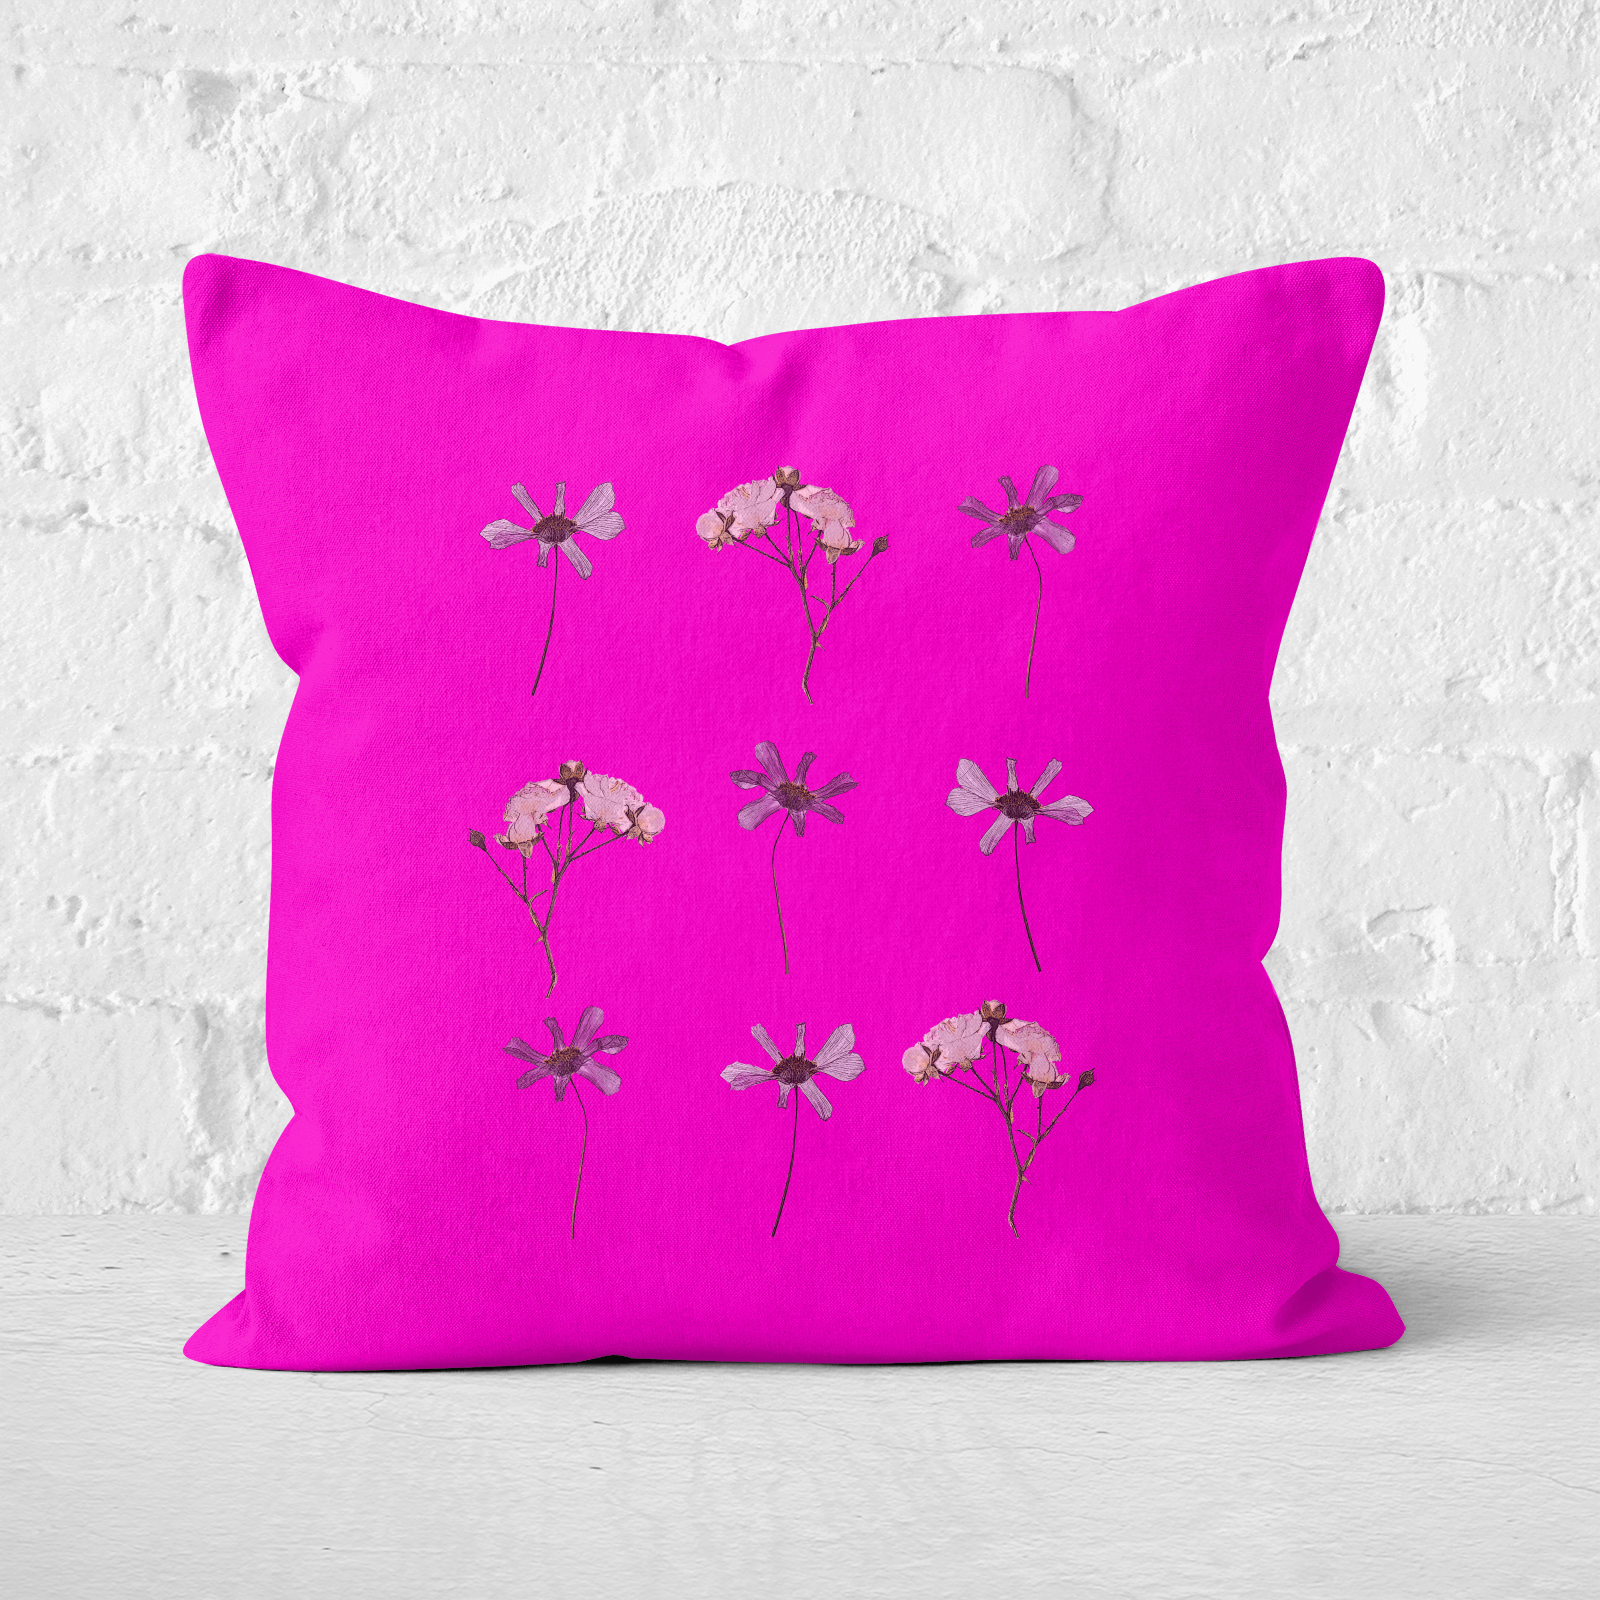 Pressed Flowers Hot Tones Trio Flower Print Square Cushion - 60x60cm - Soft Touch